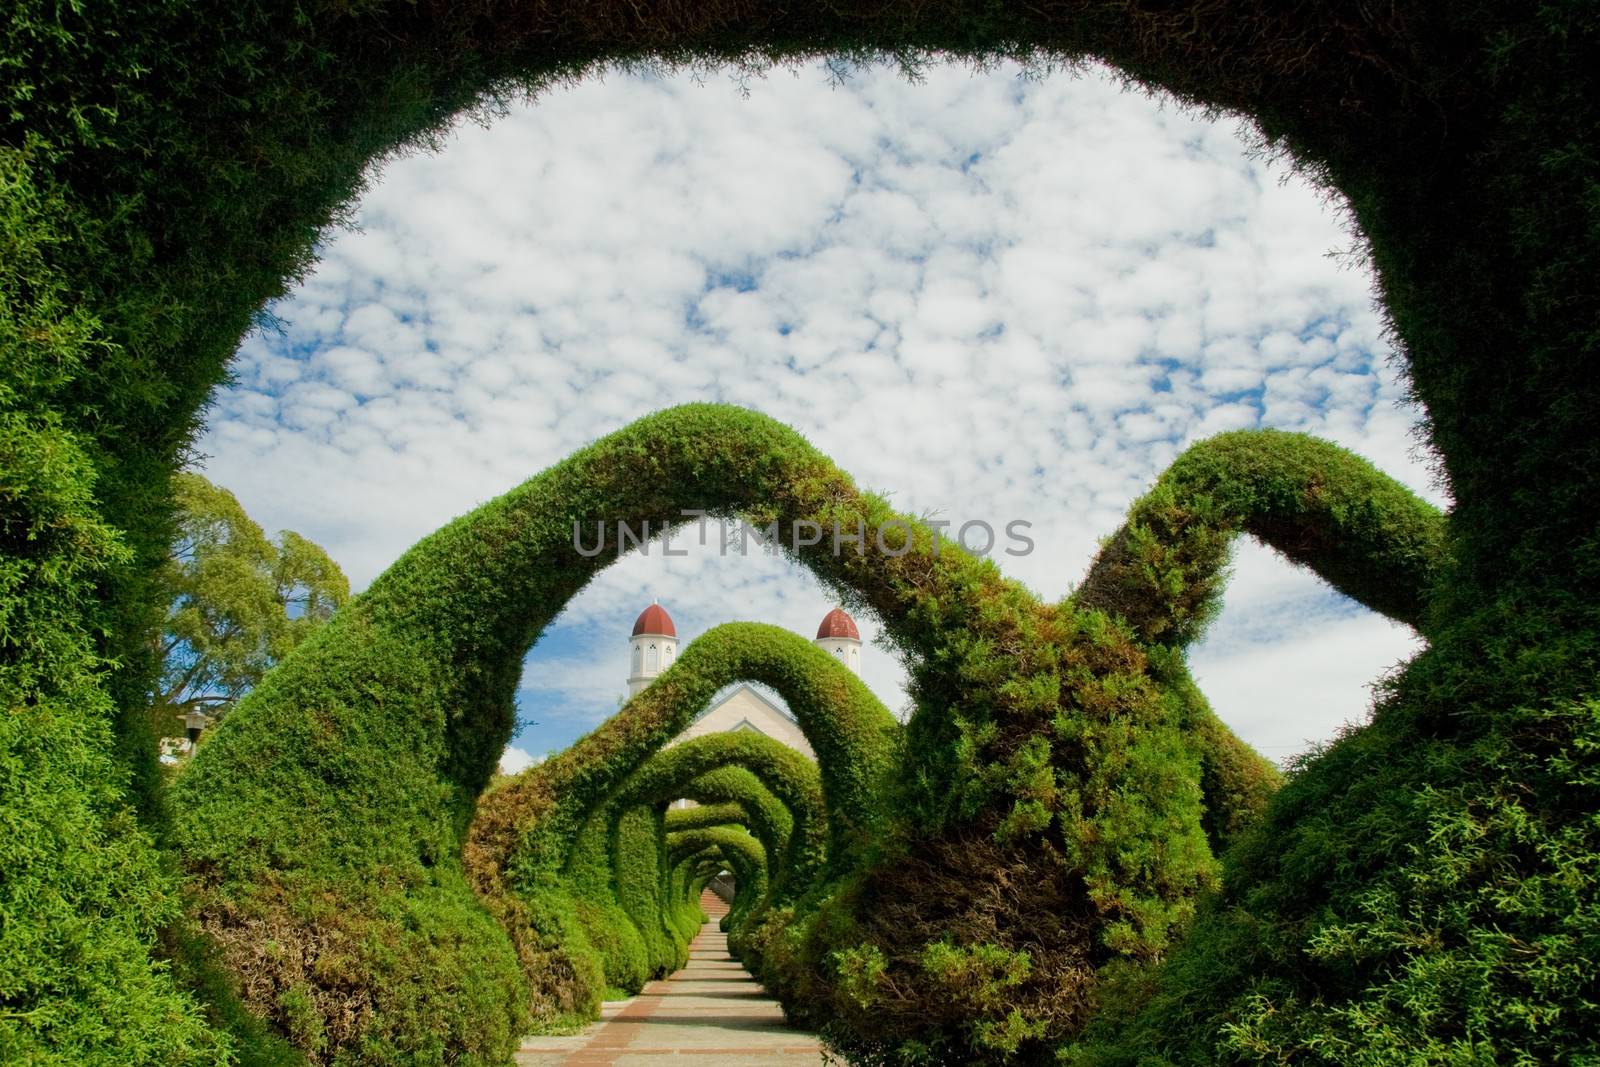 Sculpted juniper bush garden in Zarcero, Costa Rica. Hedges and bushes trimmed to form arches over a path.